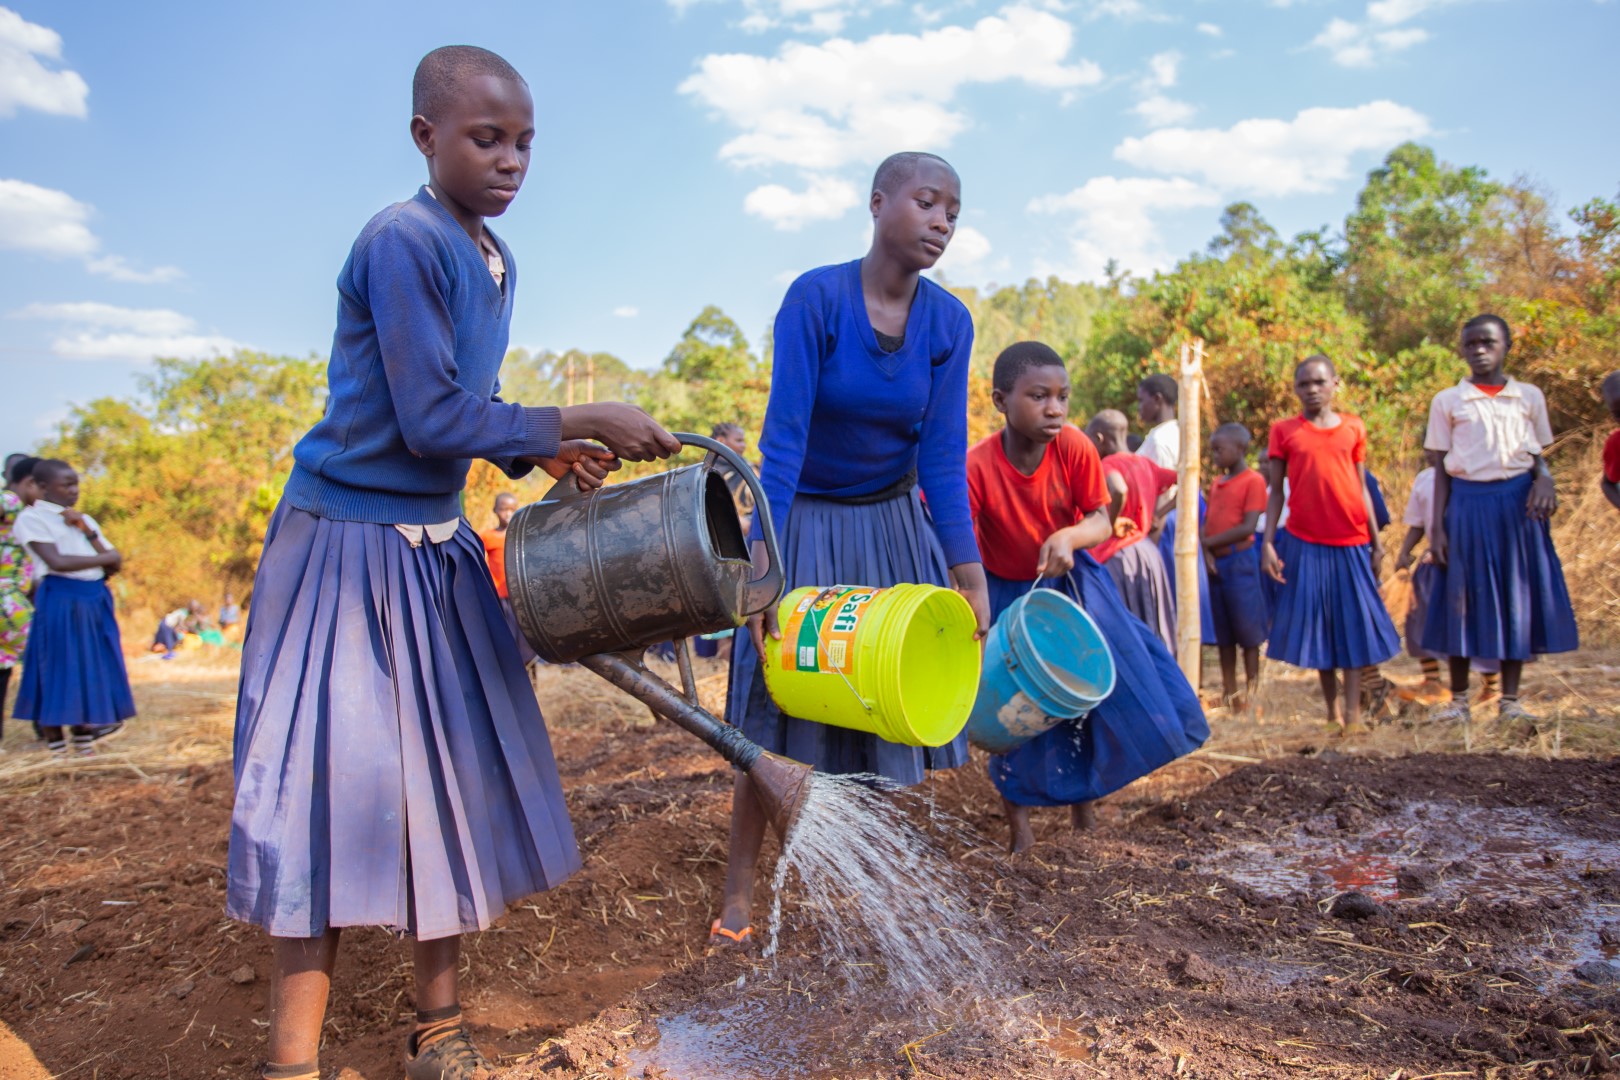 Pupils watering during an Agriculture class